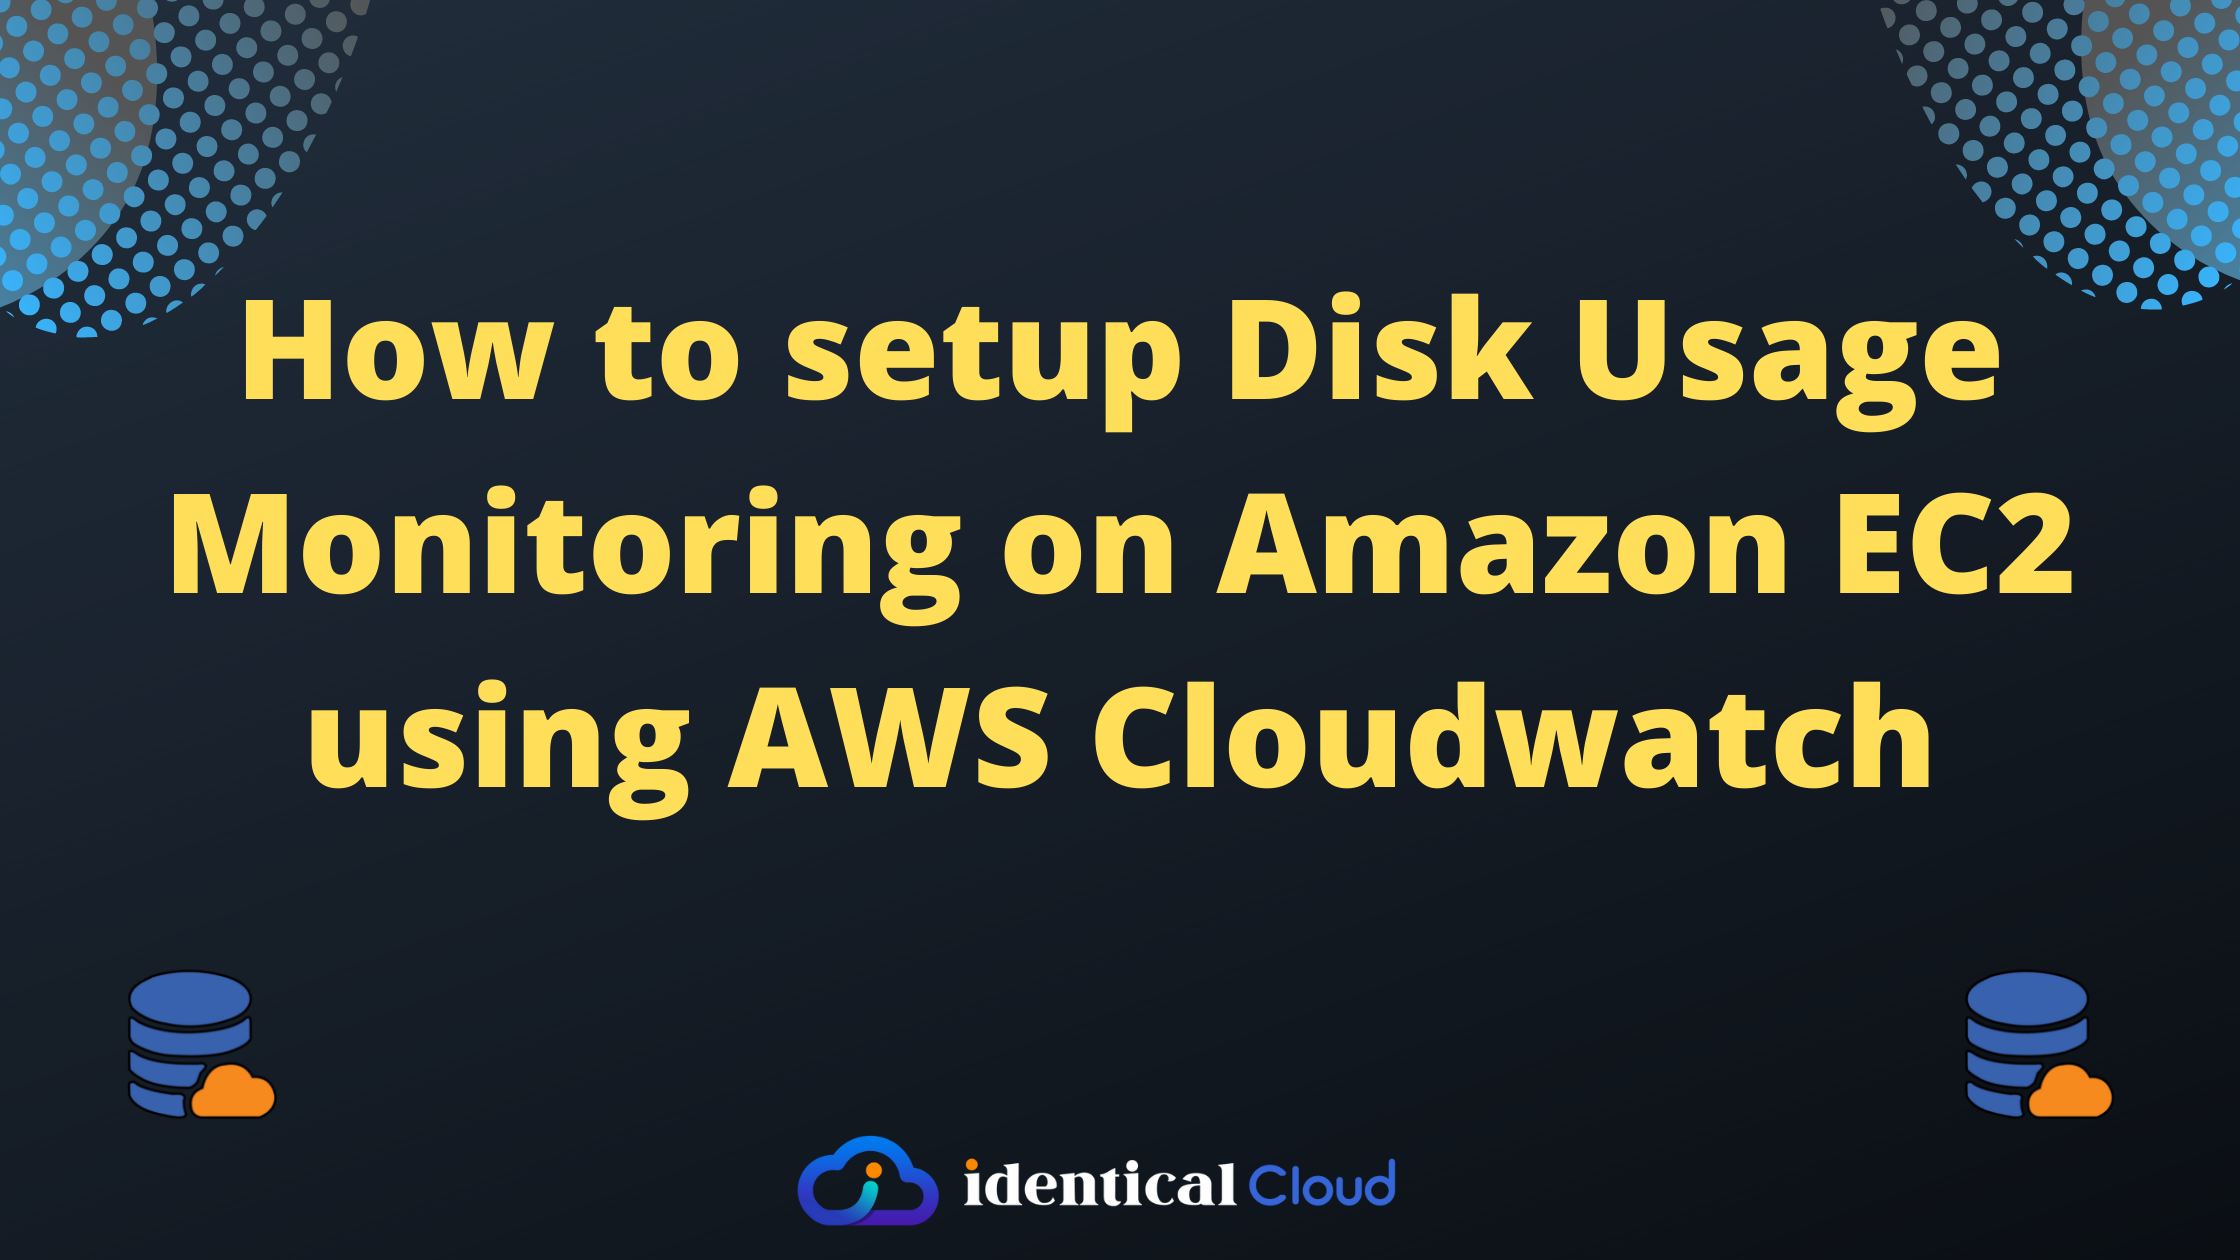 How to setup Disk Usage Monitoring on Amazon EC2 using AWS Cloudwatch